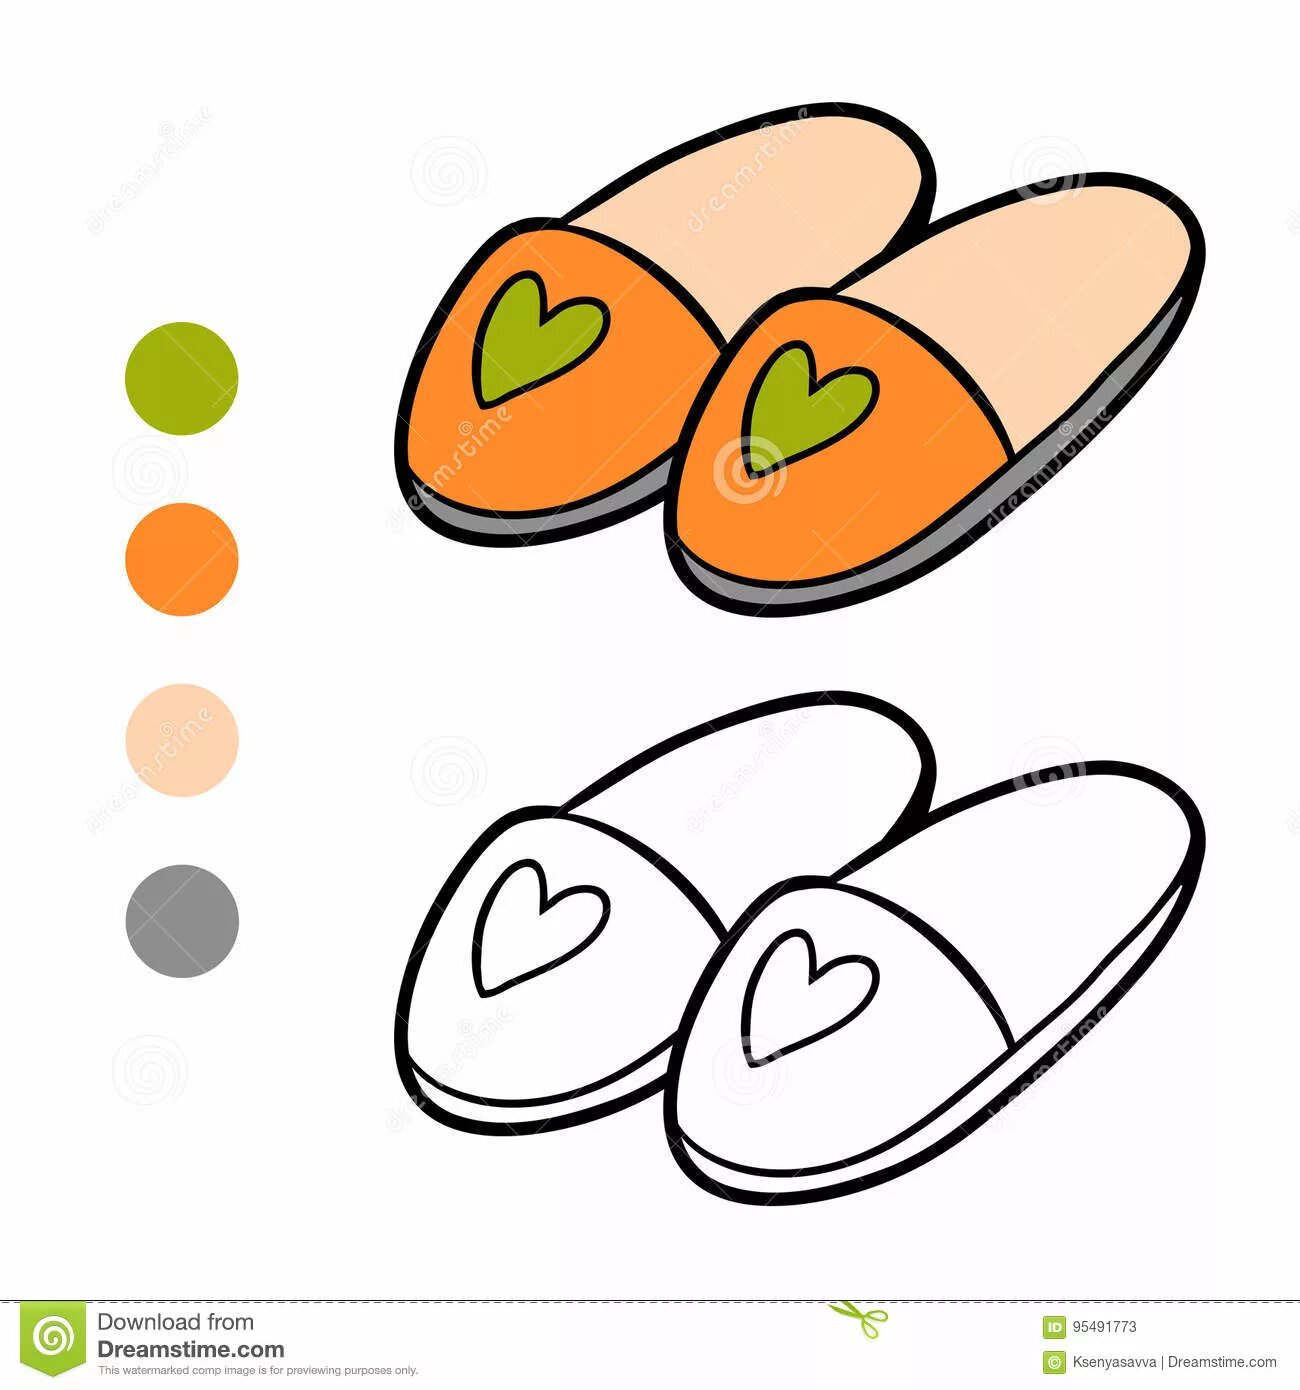 Coloring book gorgeous slippers for kids